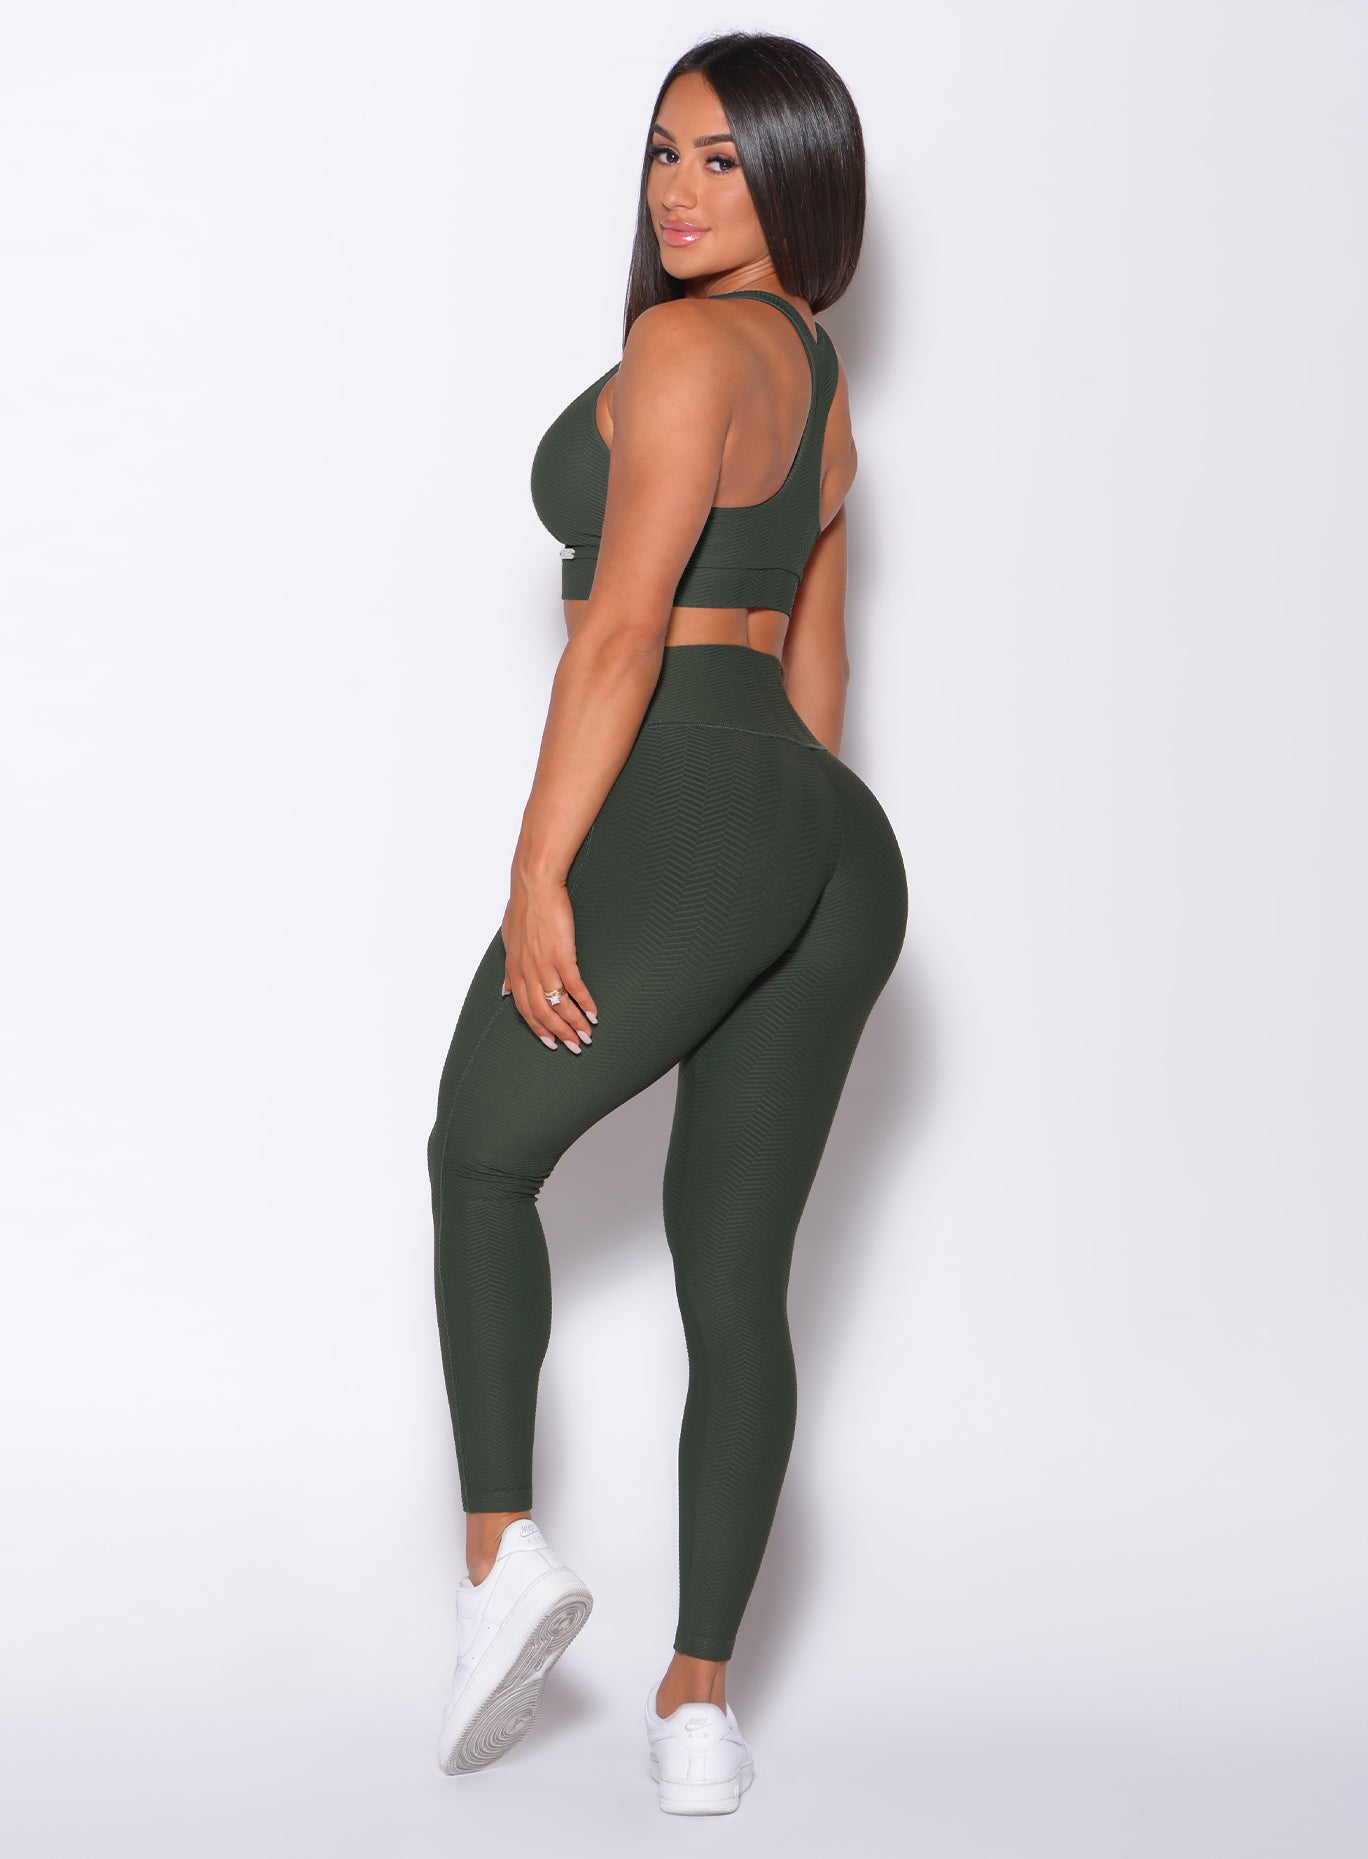 Left side profile view of a model facing to her left wearing our Chevron Leggings in lucky green color and matching bra